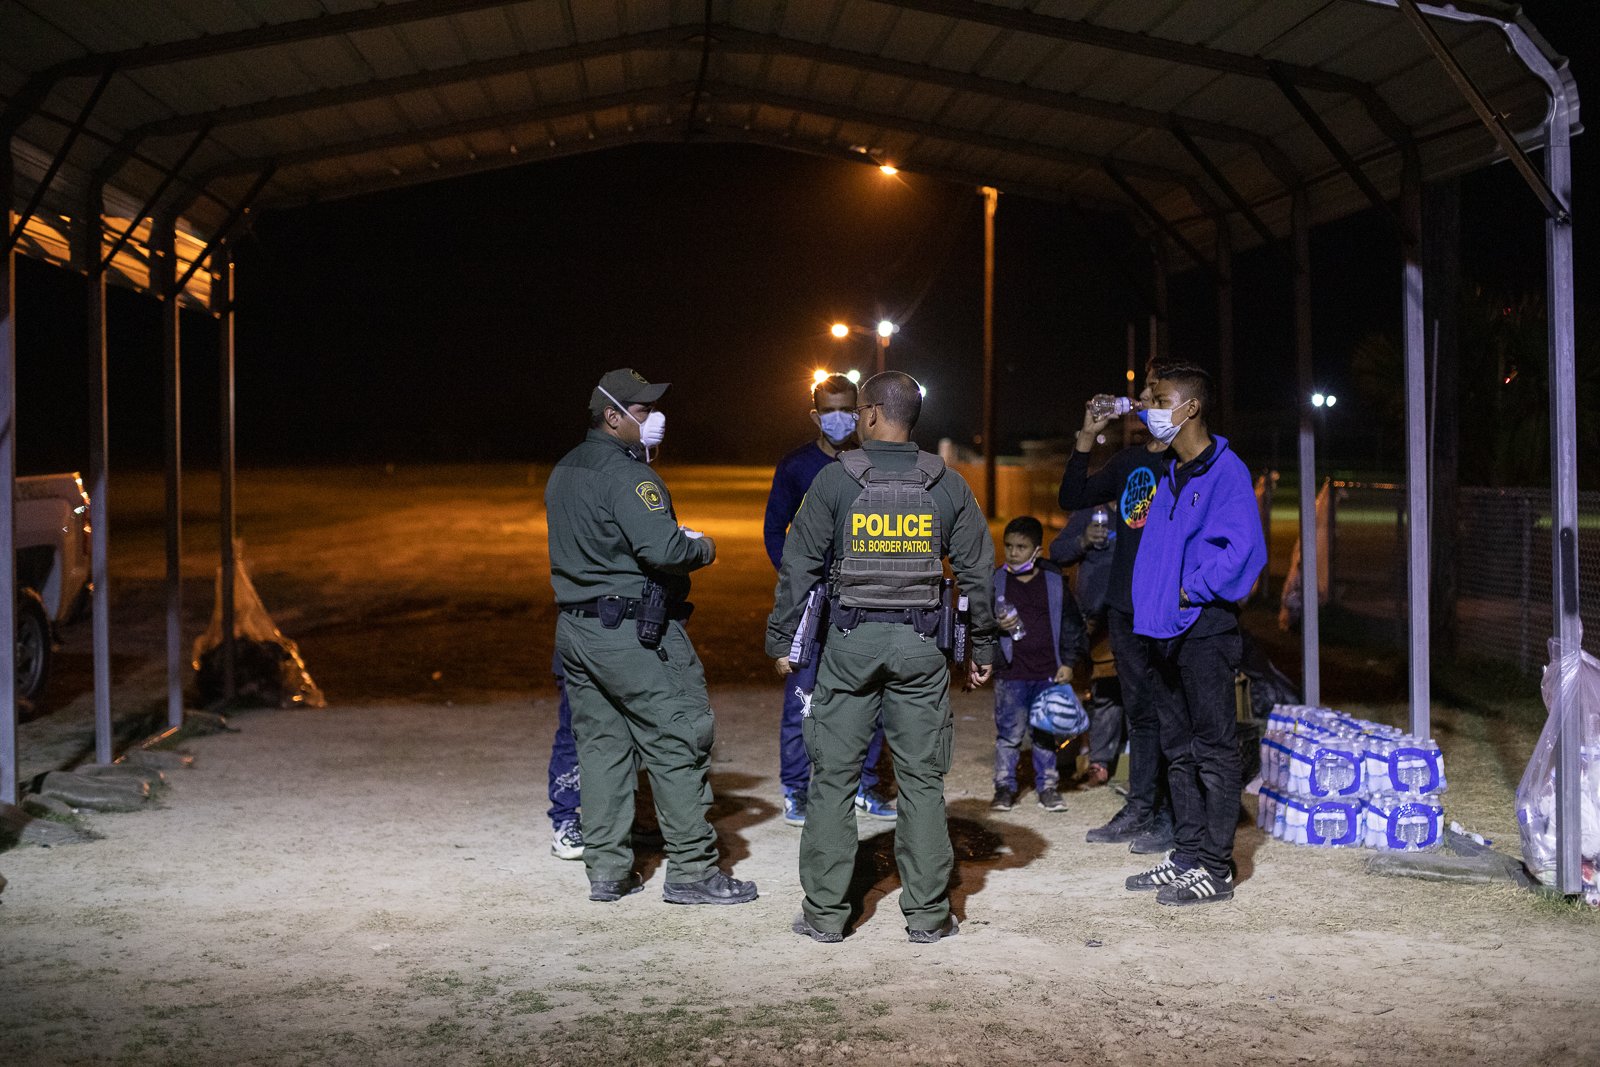 Border officials processed around 100 migrants who surrendered in smaller groups near La Joya, Texas on August 7, 2021. (Kaylee Greenlee – Daily Caller News Foundation)